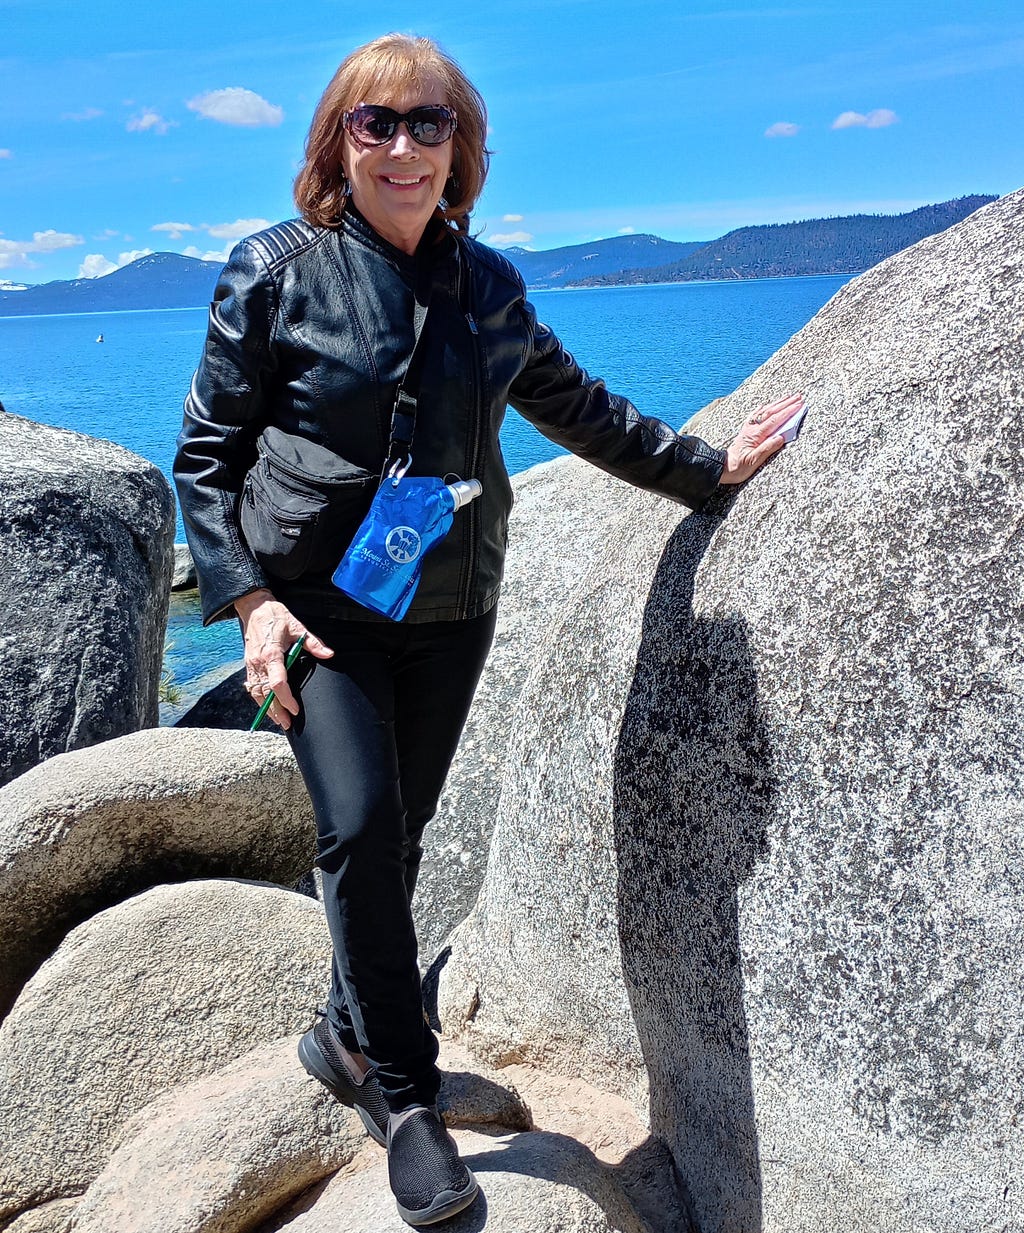 Author Judith Valente stands on top of and surrounded by hugh boulders left by an ancient glacier on the shore of Lake Tahoe near Reno, NV.